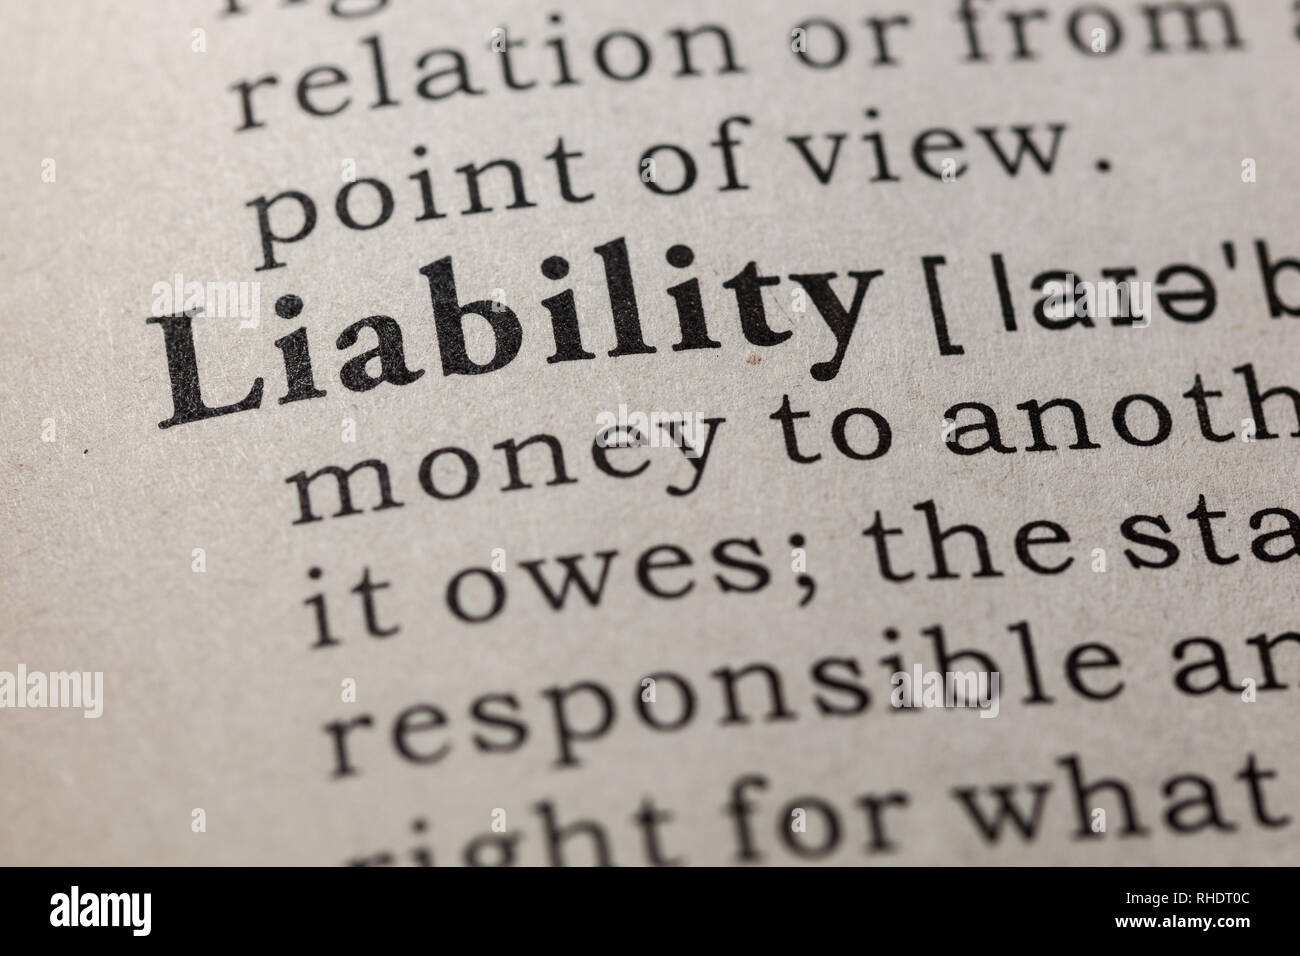 Fake Dictionary, Dictionary definition of the word liability. including key descriptive words. Stock Photo